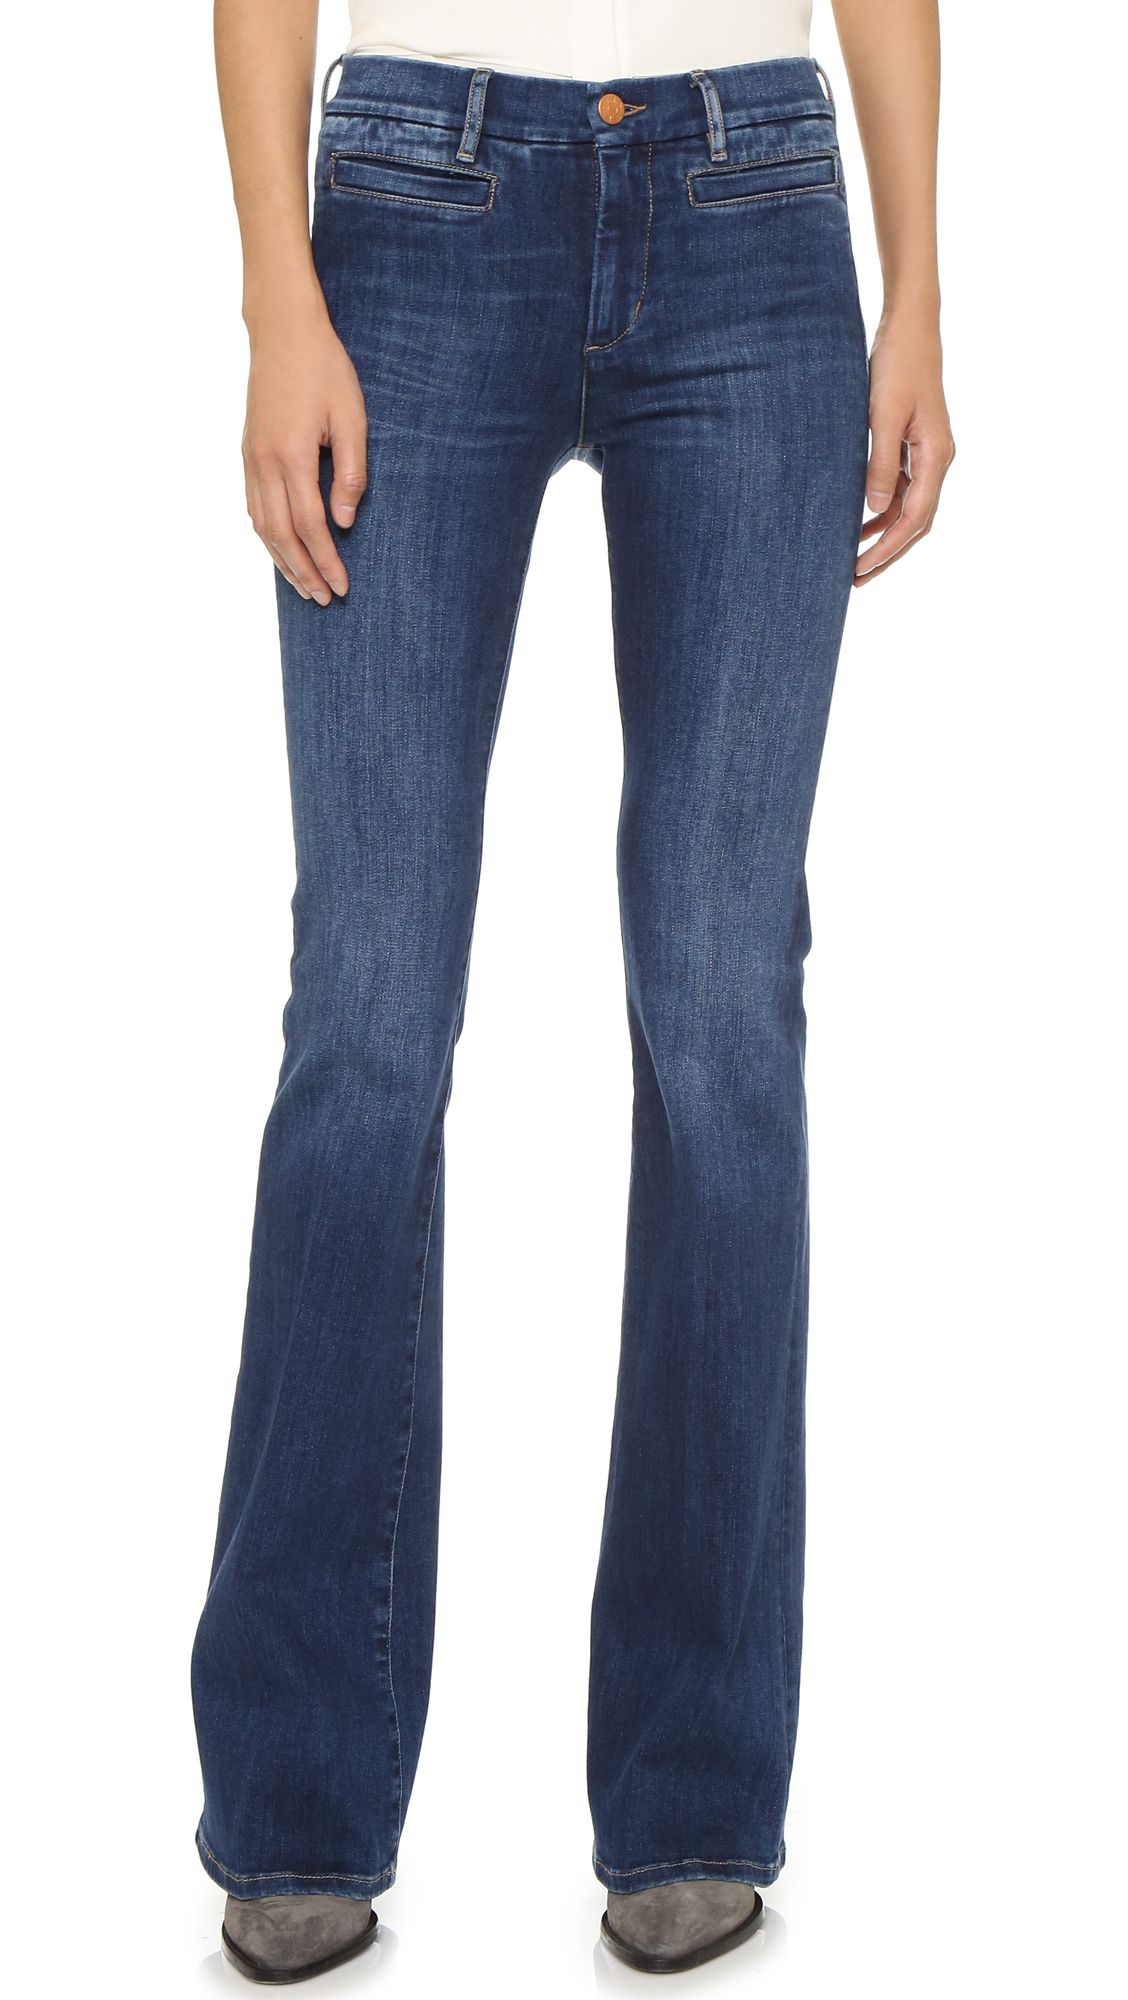 M.I.H Jeans The Marrakesh Flare Jeans - Clarice | Shopbop